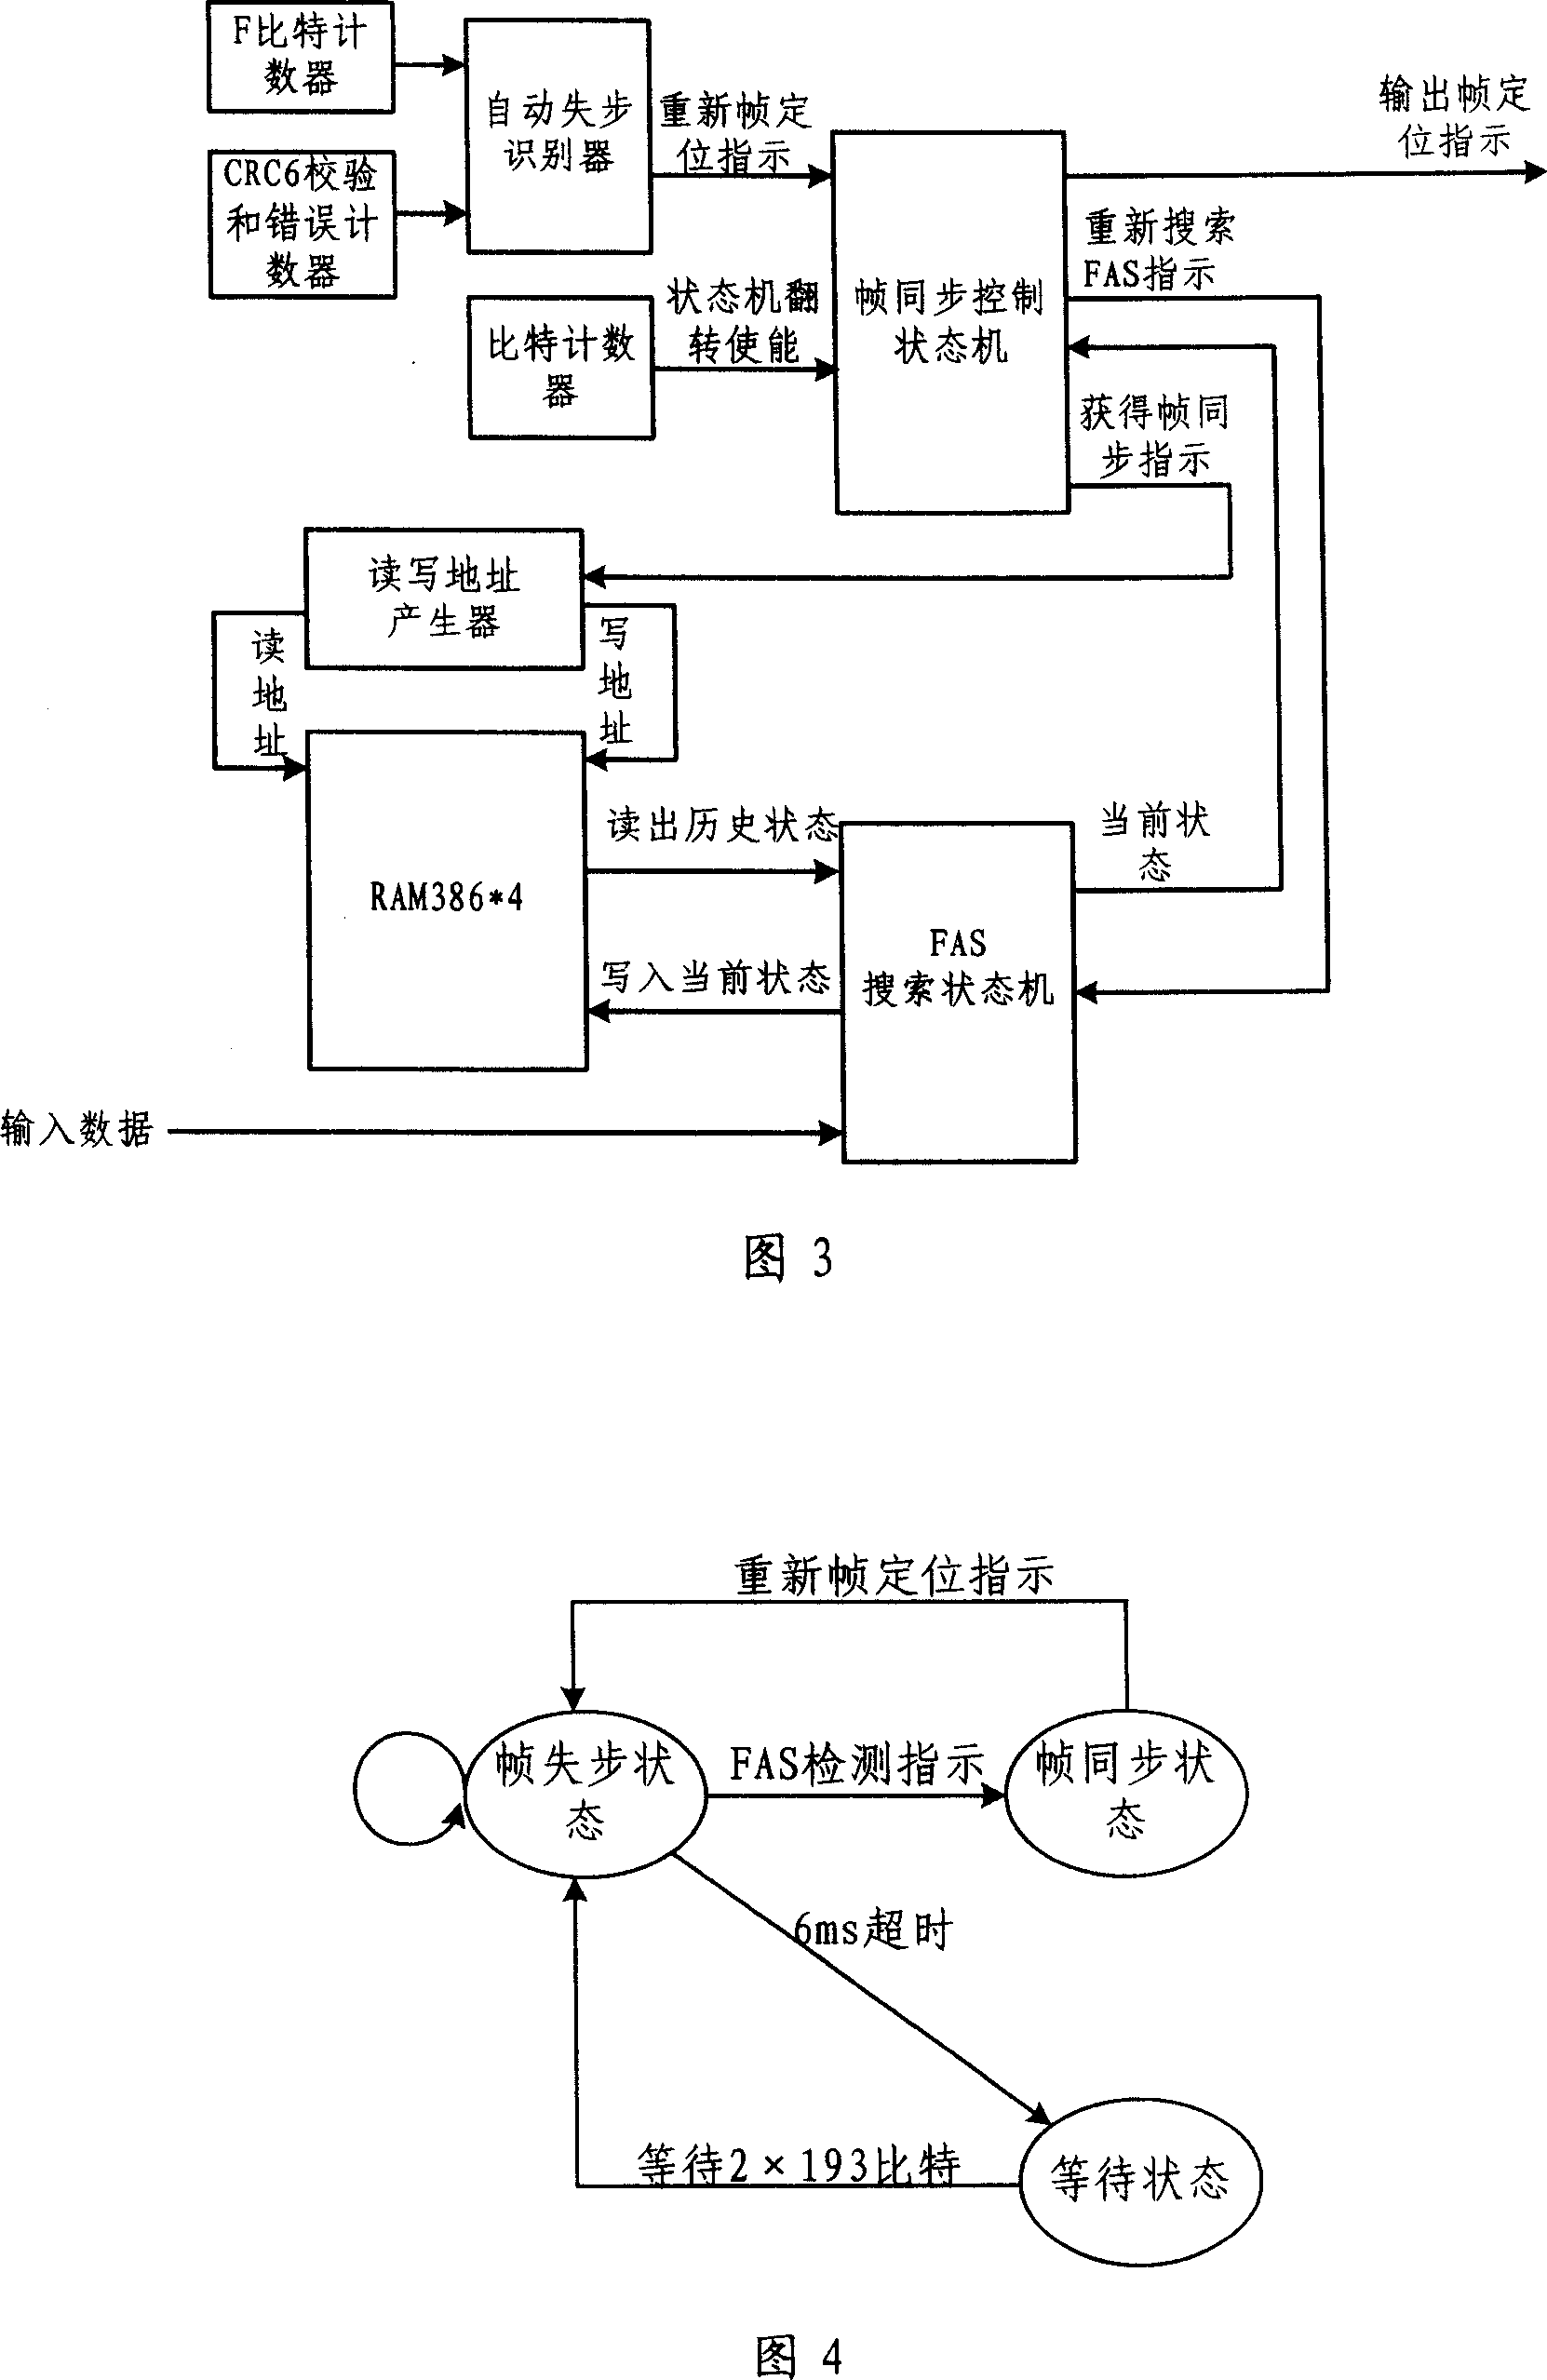 Method and device for extended super frame synchronization for T1 system